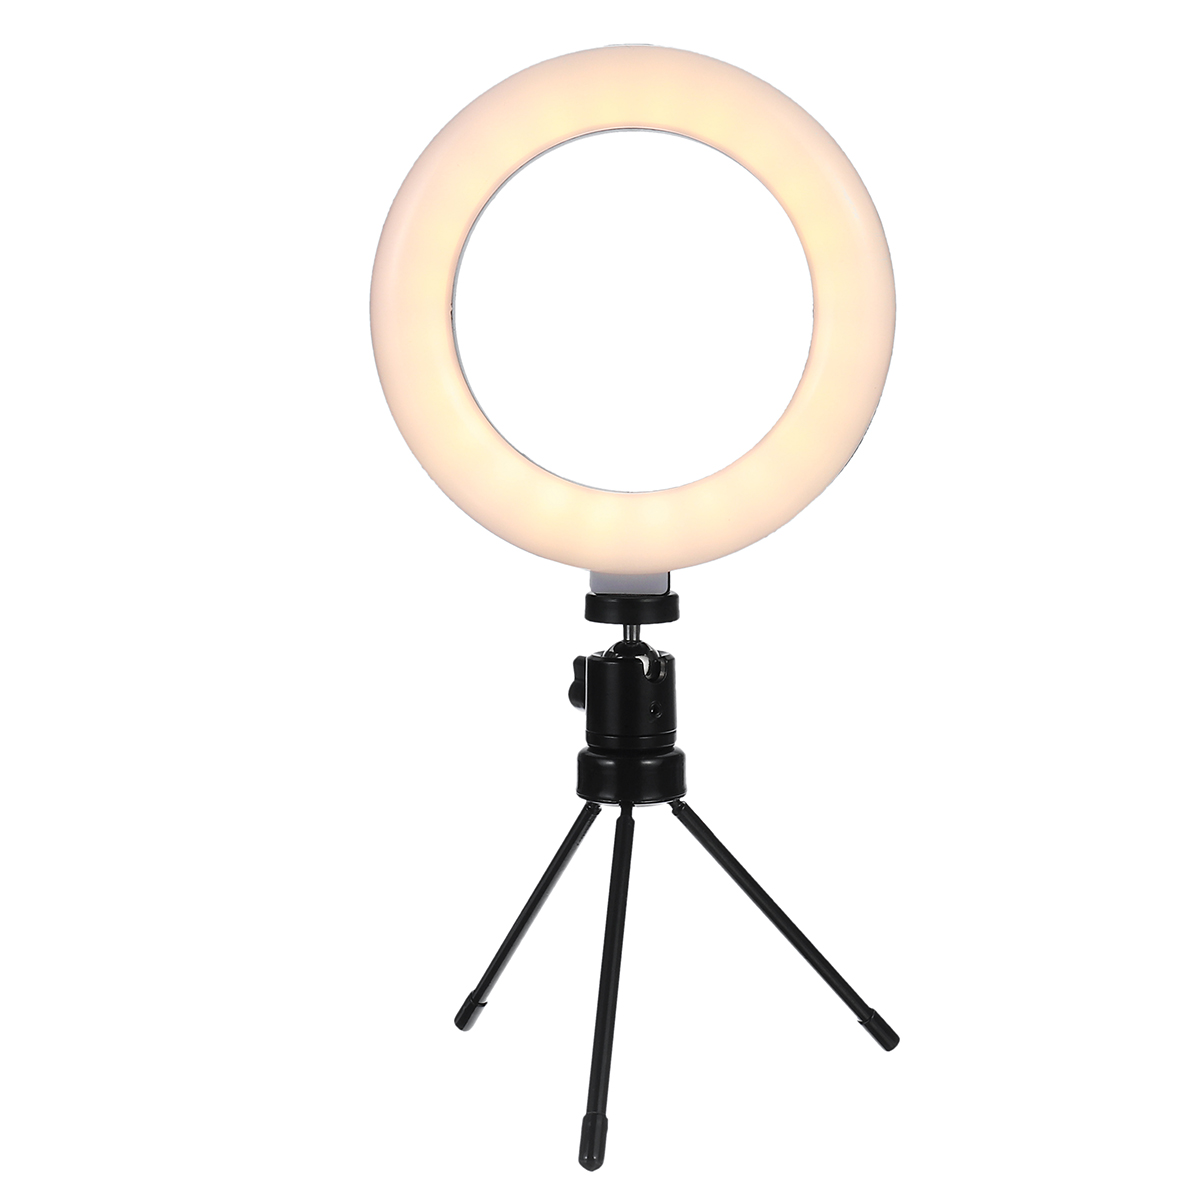 Photography-LED-Mirrors-Selfie-Ring-Light-260MM-Dimmable-Camera-Phone-Lamp-Fill-Light-with-Table-Tri-1632273-7